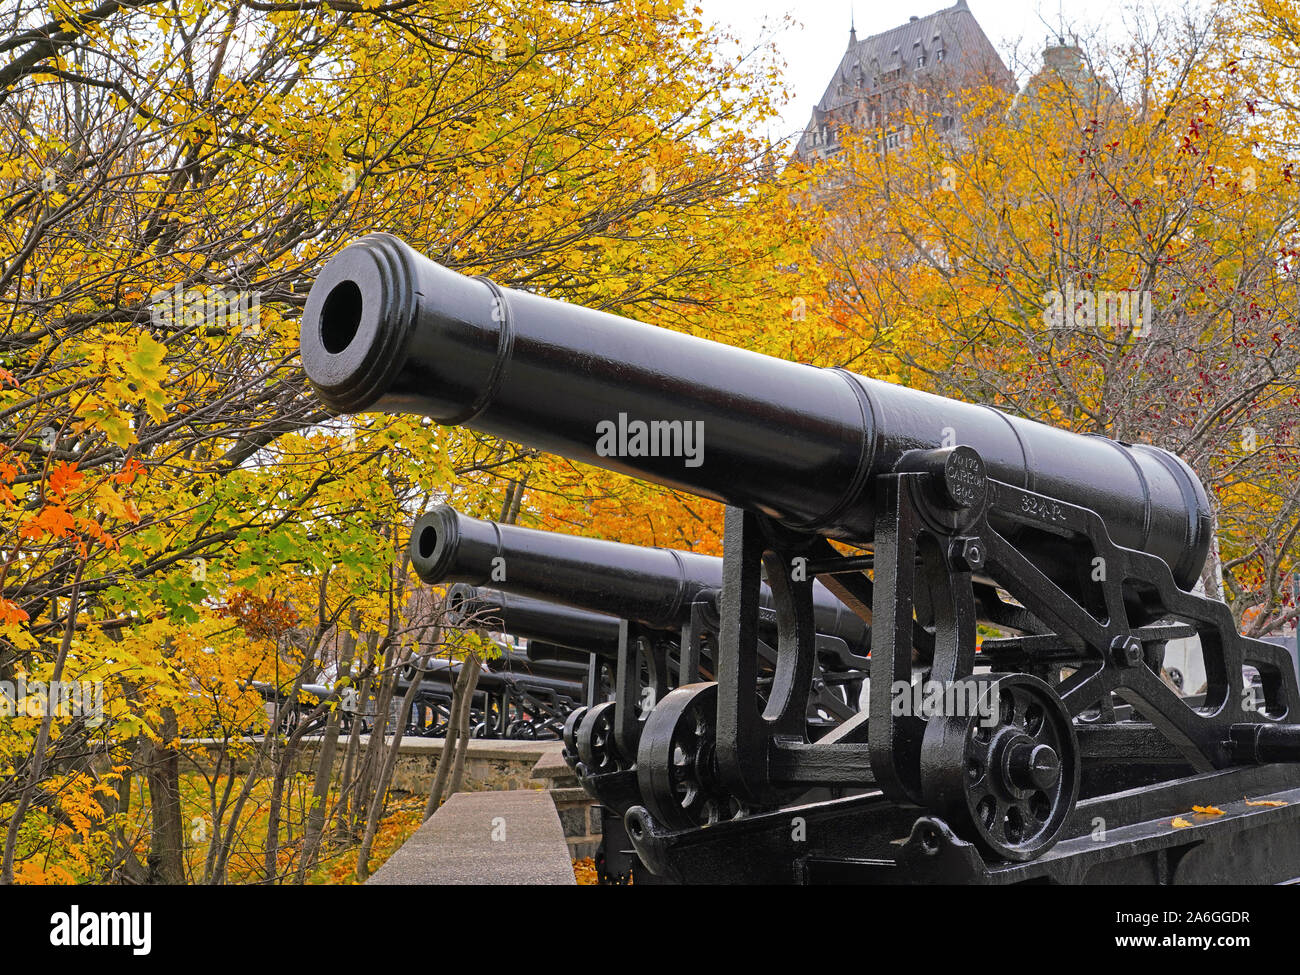 Cannons on wall of Old Quebec City with Chateau Frontenac in background in autumn. Stock Photo